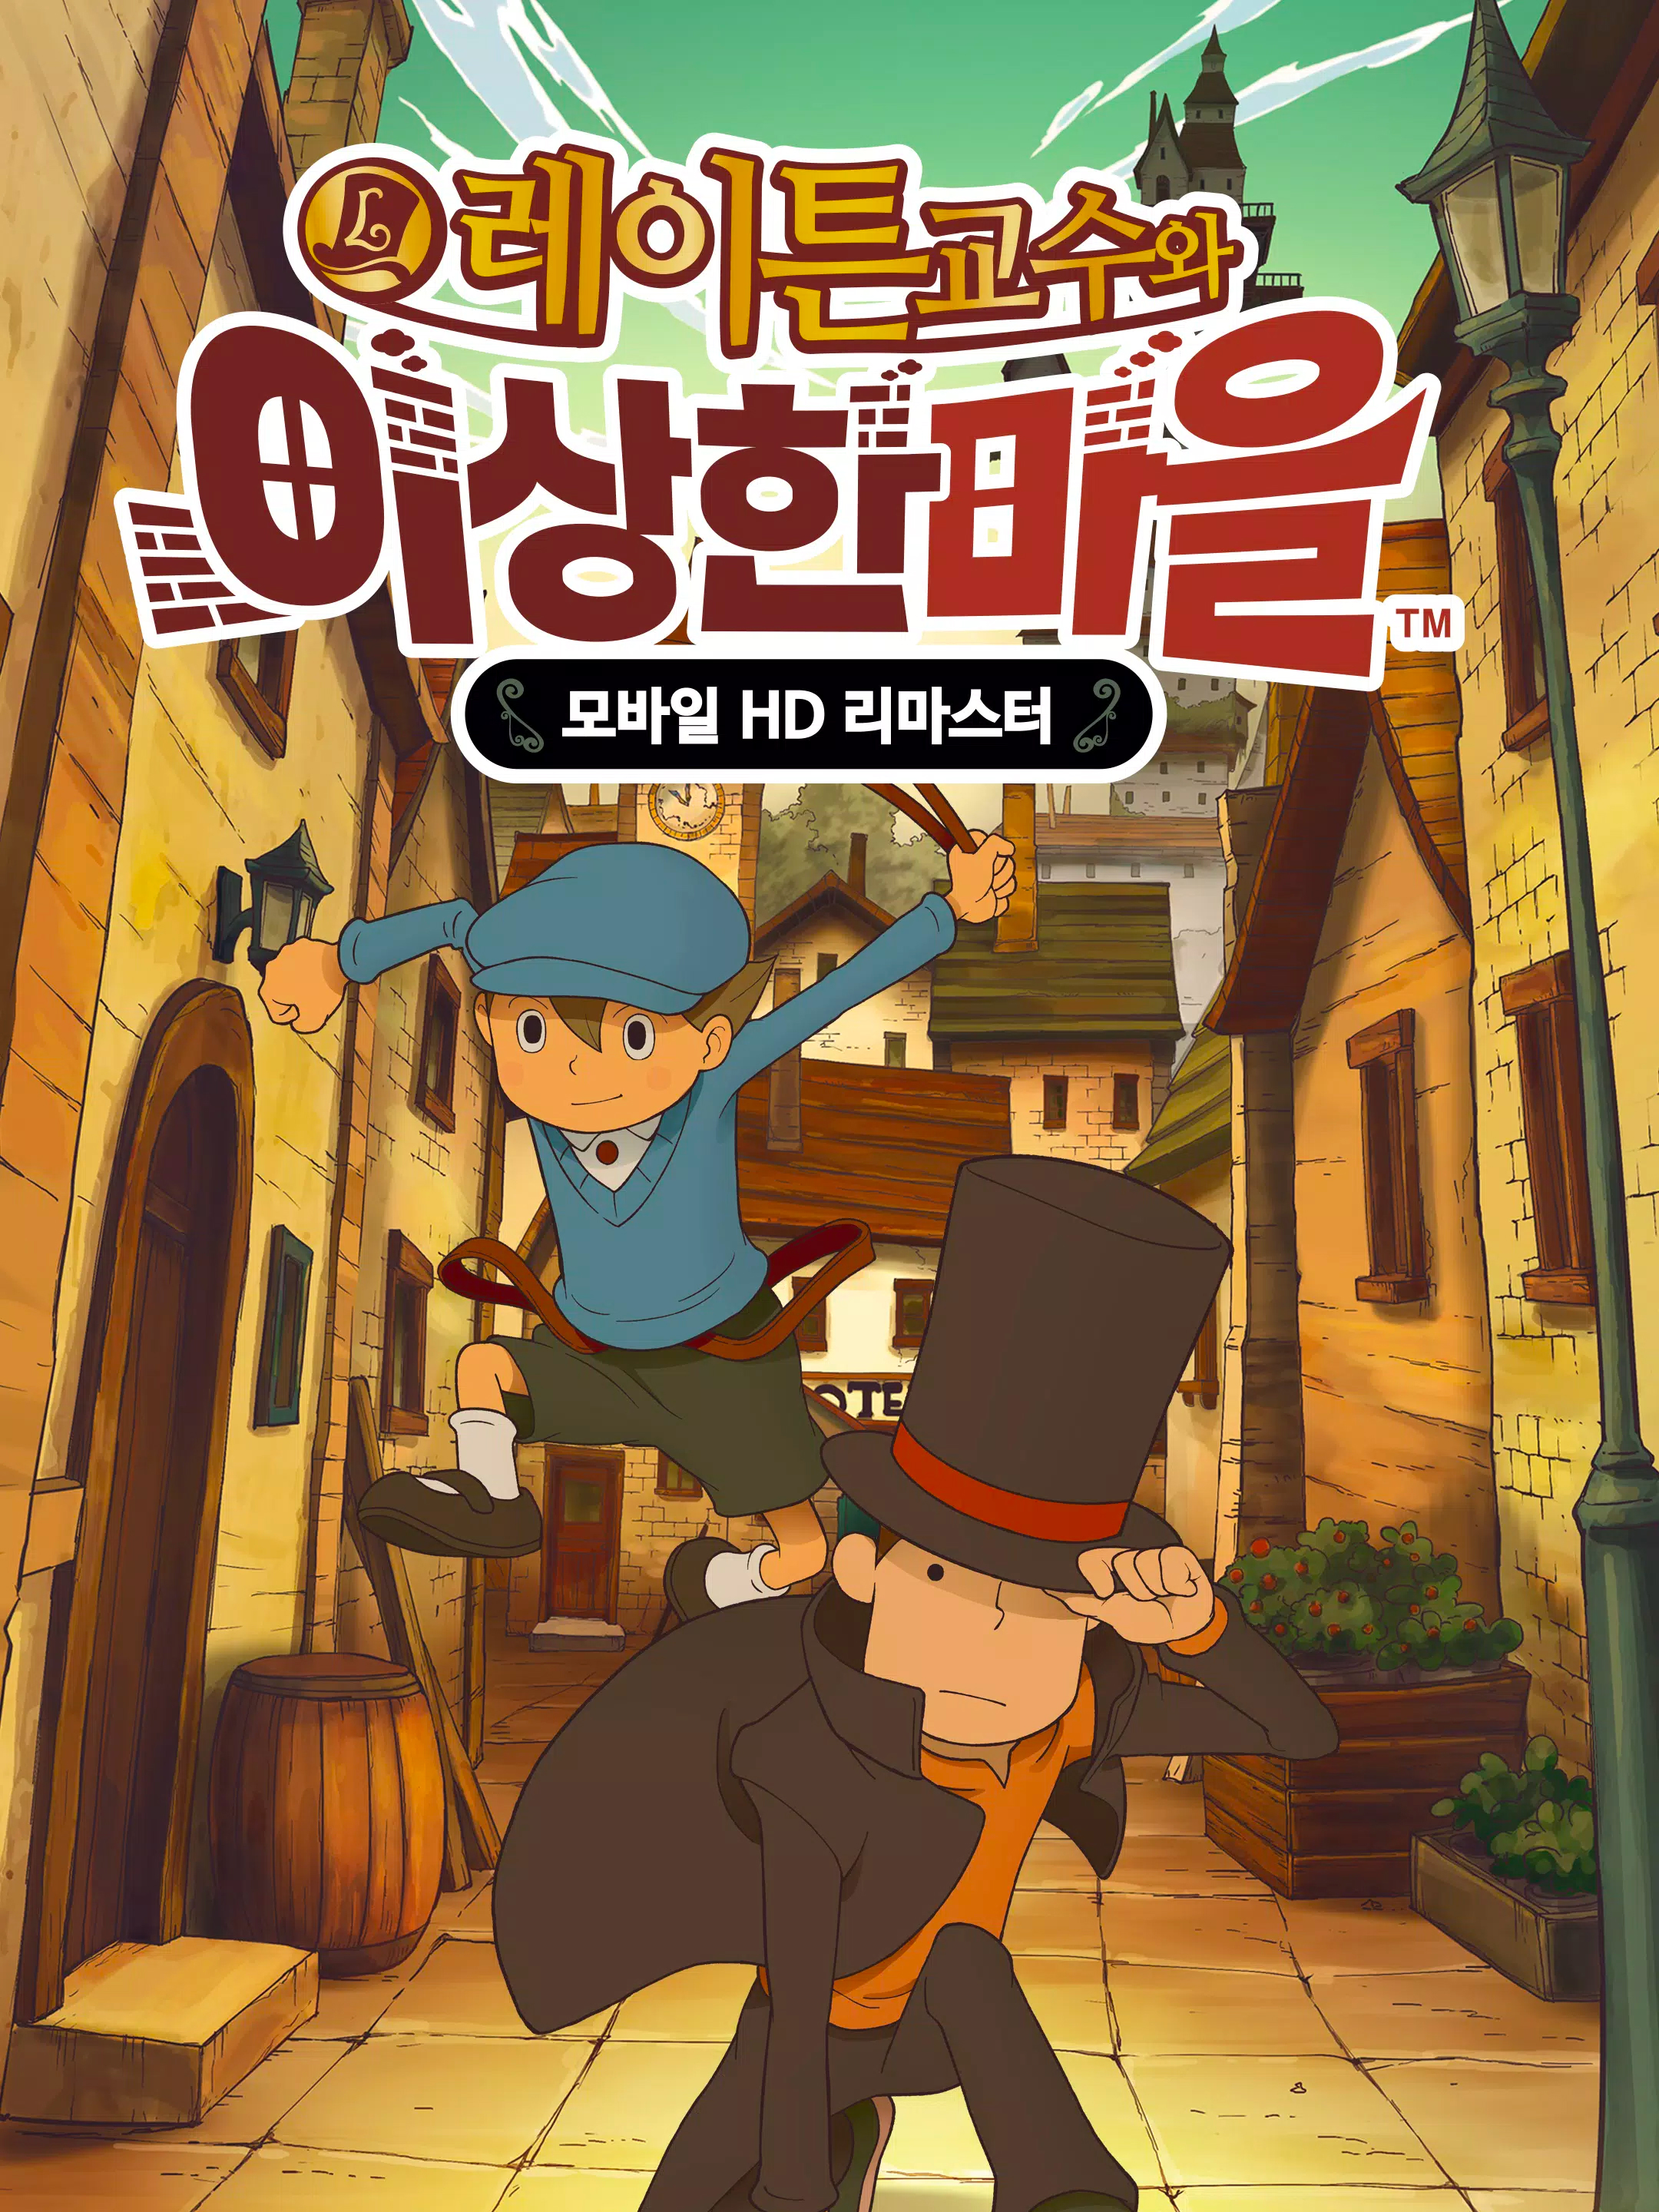 Professor Layton and the Curious Village: HD for Mobile